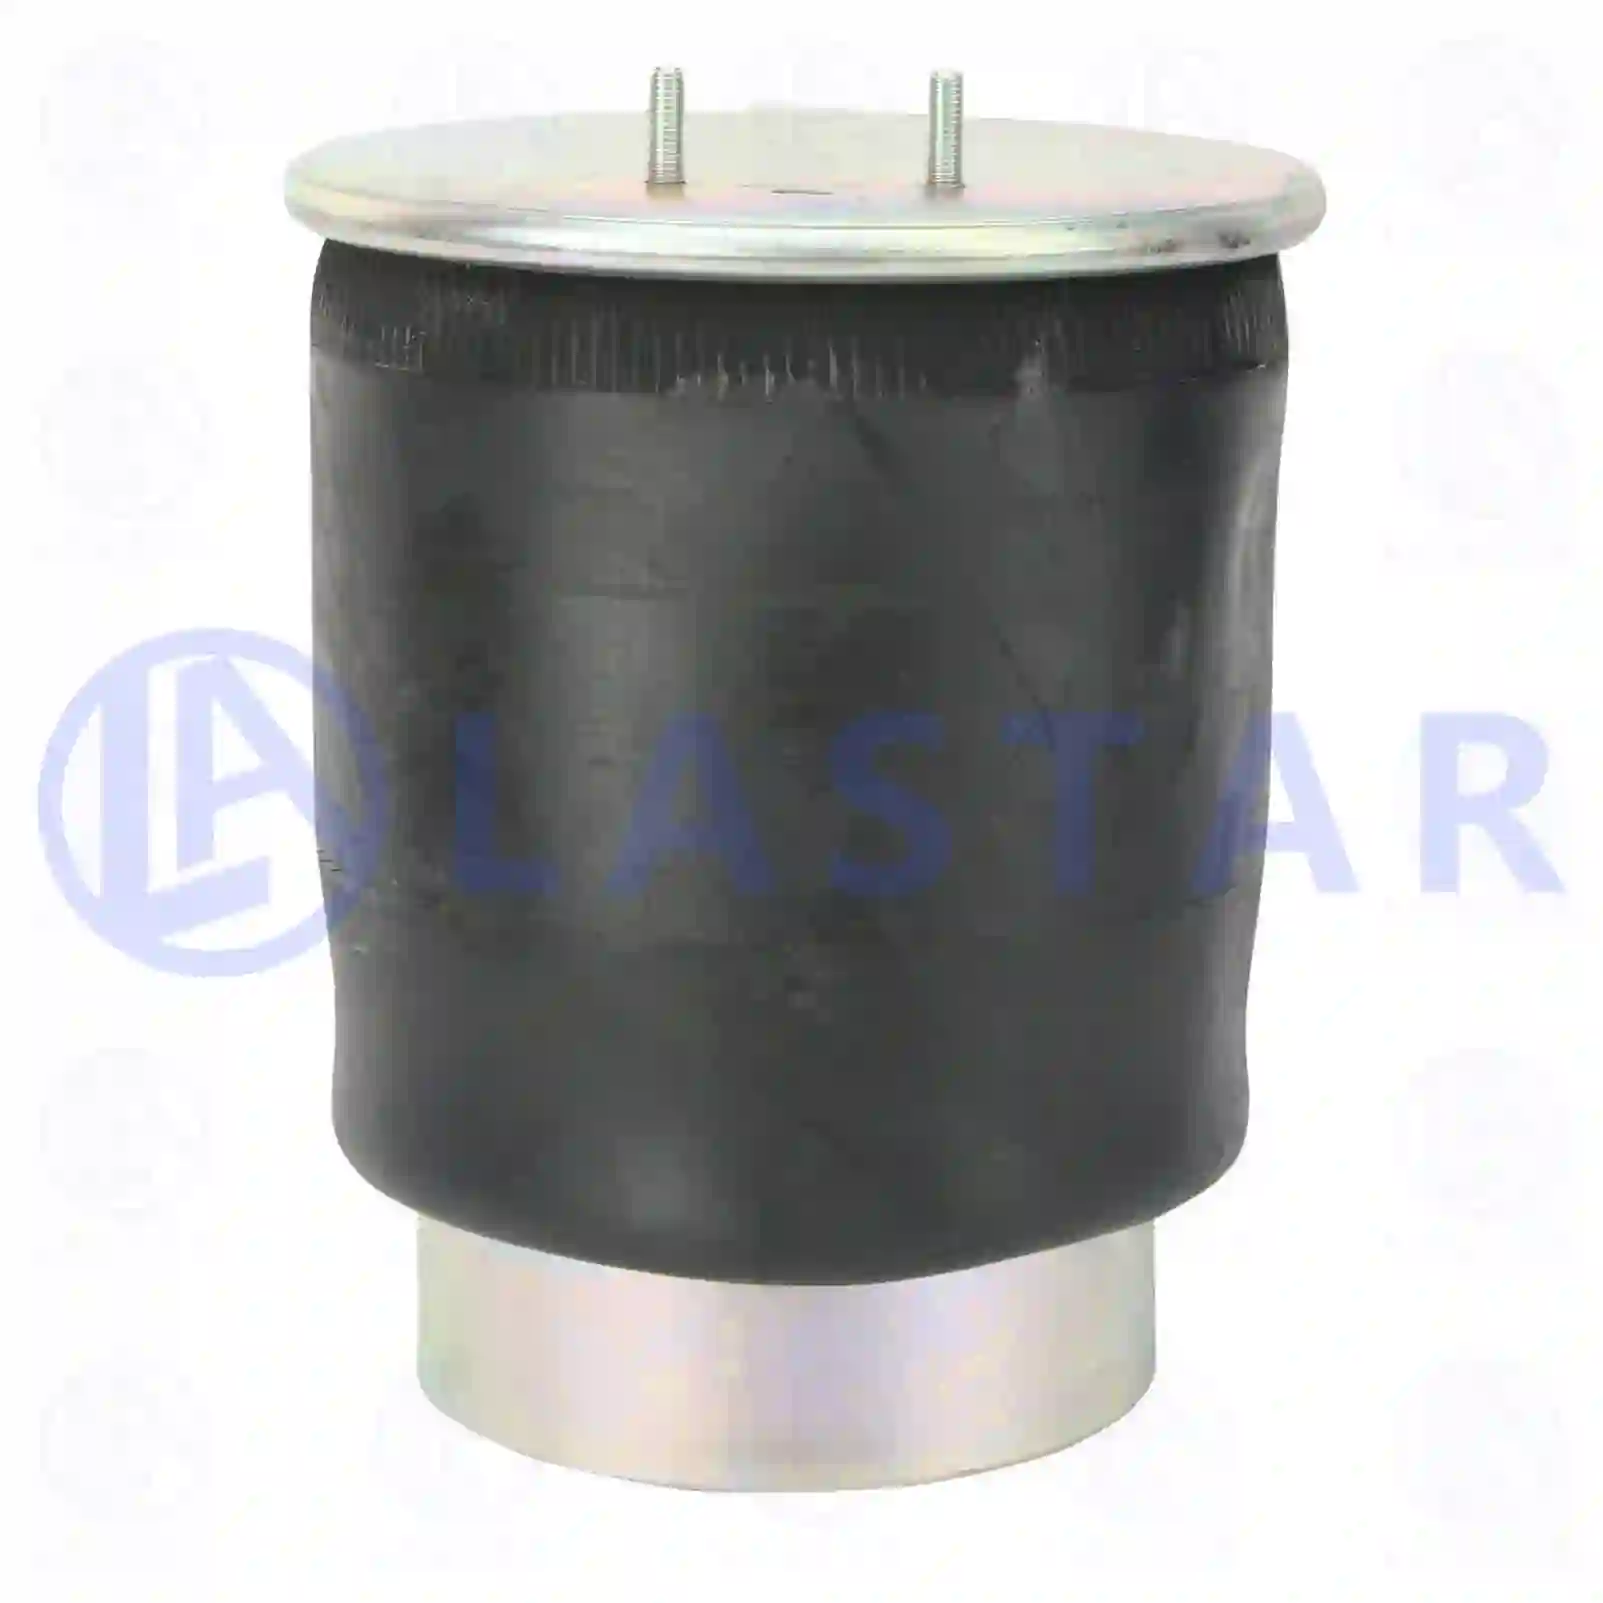 Air spring, with steel piston, 77729590, 1076412, 20554770, 3173271, ||  77729590 Lastar Spare Part | Truck Spare Parts, Auotomotive Spare Parts Air spring, with steel piston, 77729590, 1076412, 20554770, 3173271, ||  77729590 Lastar Spare Part | Truck Spare Parts, Auotomotive Spare Parts